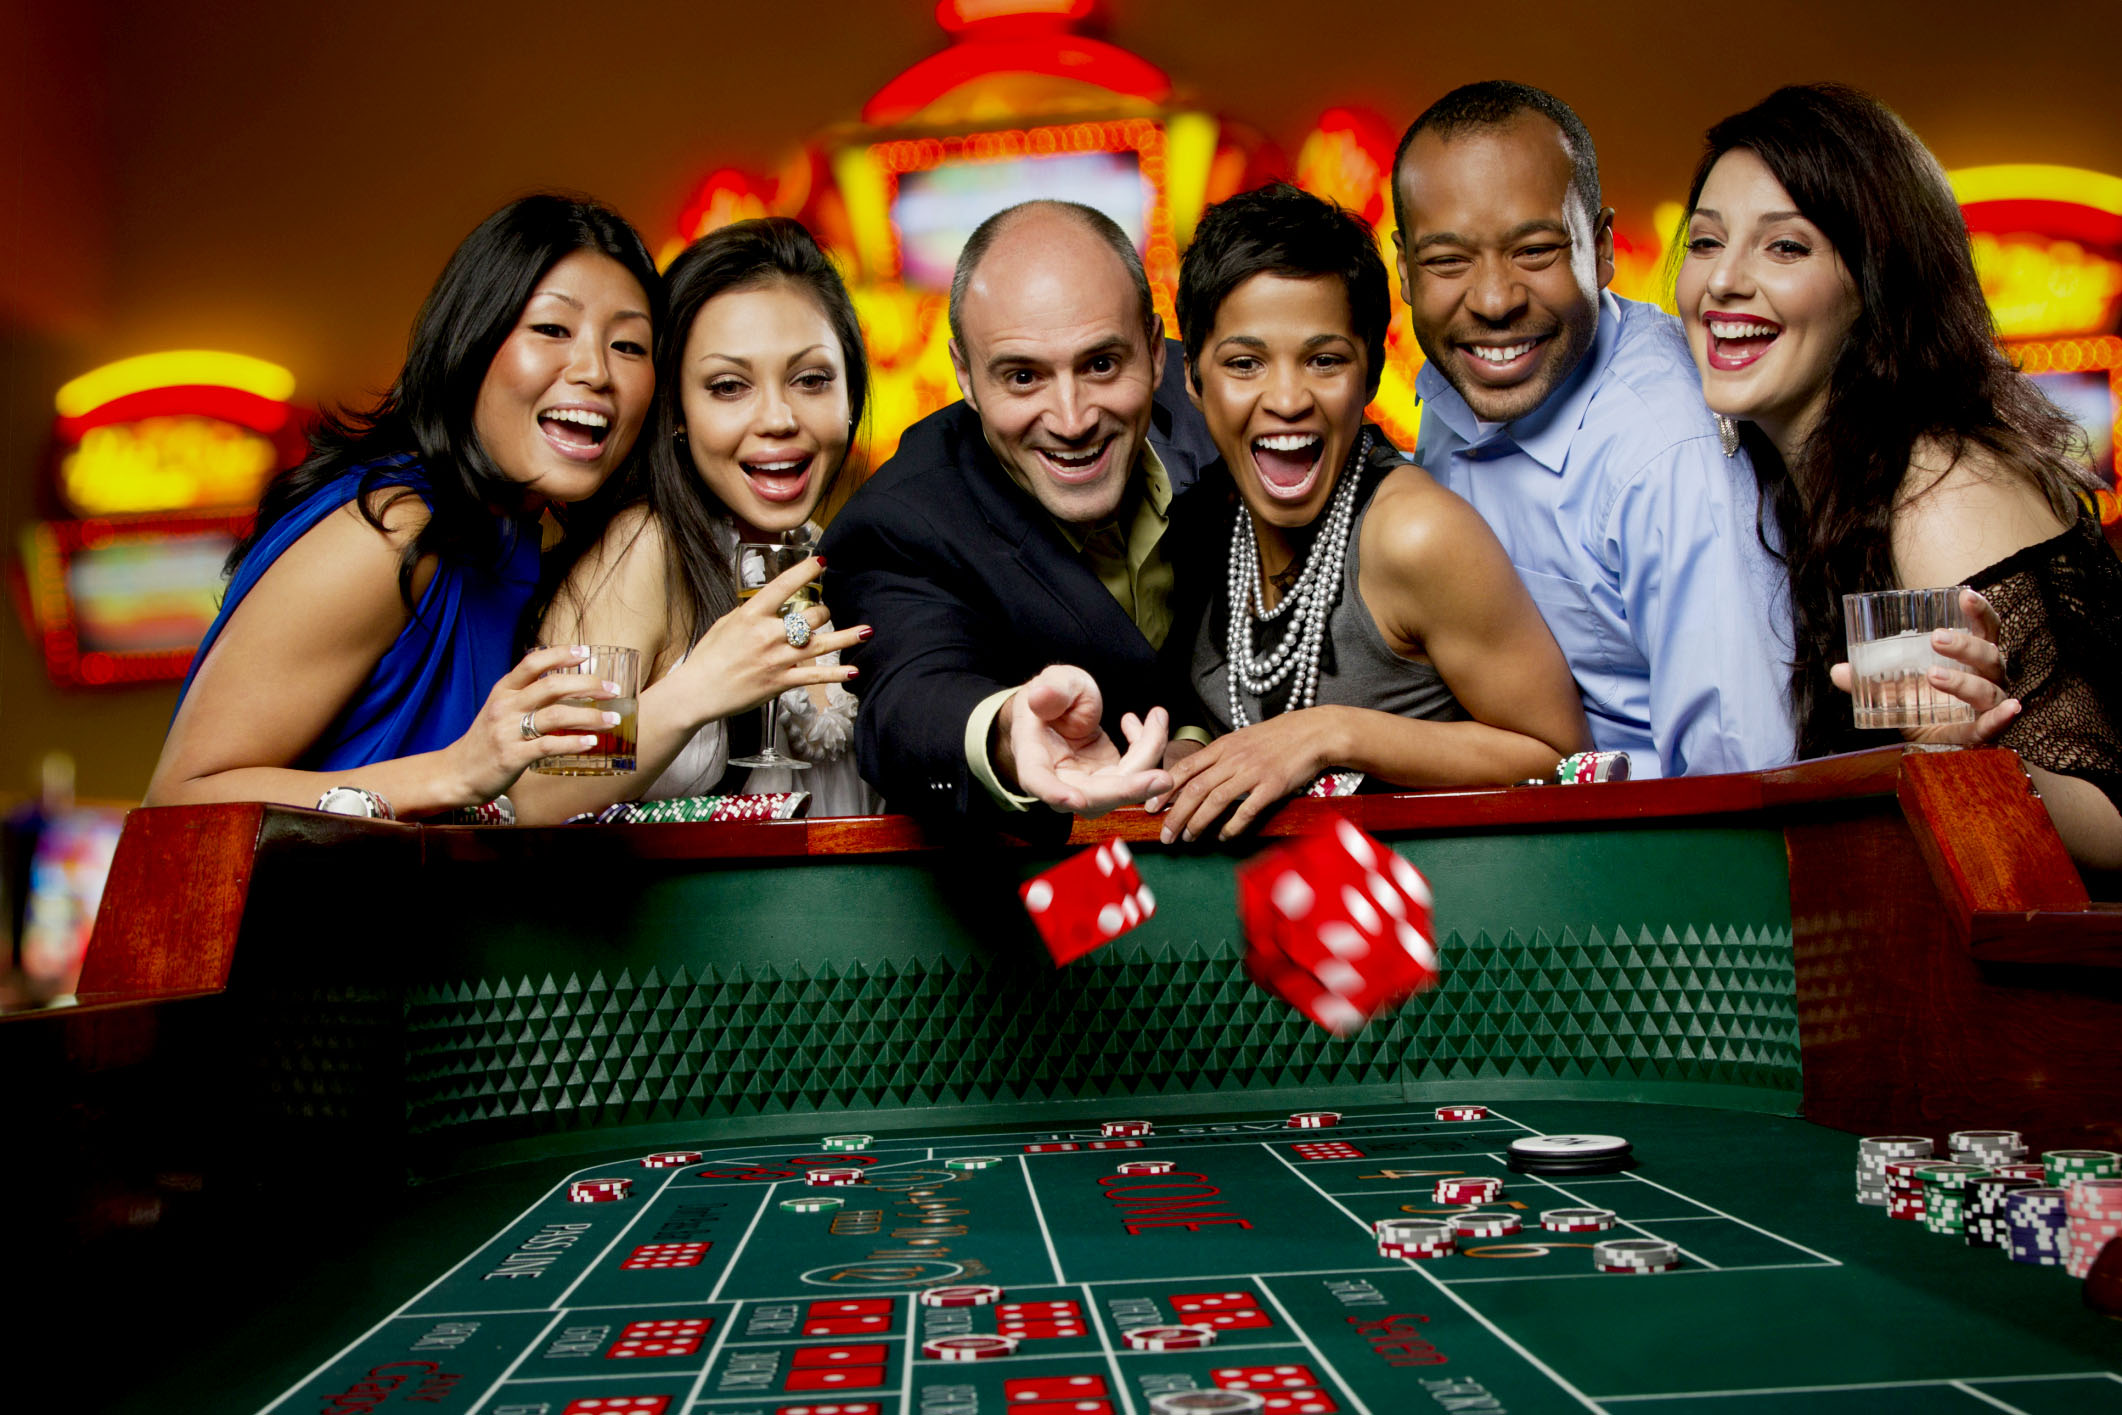 How do you check an online casino's trust and reputation?